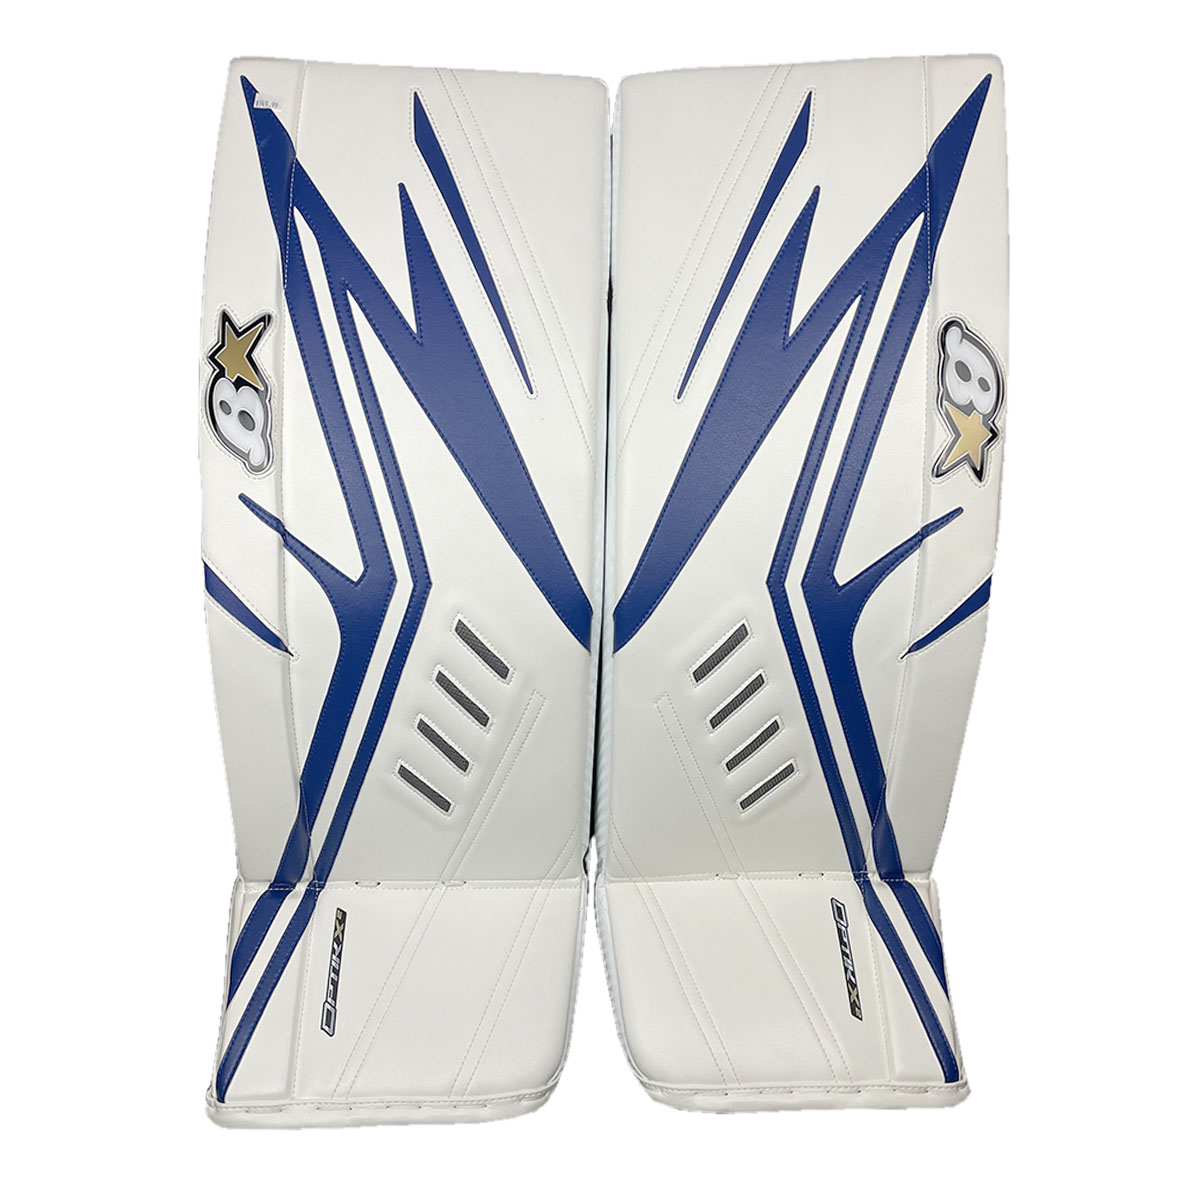 Goalie Pads Then and Now: A Look at the New Pad Restrictions